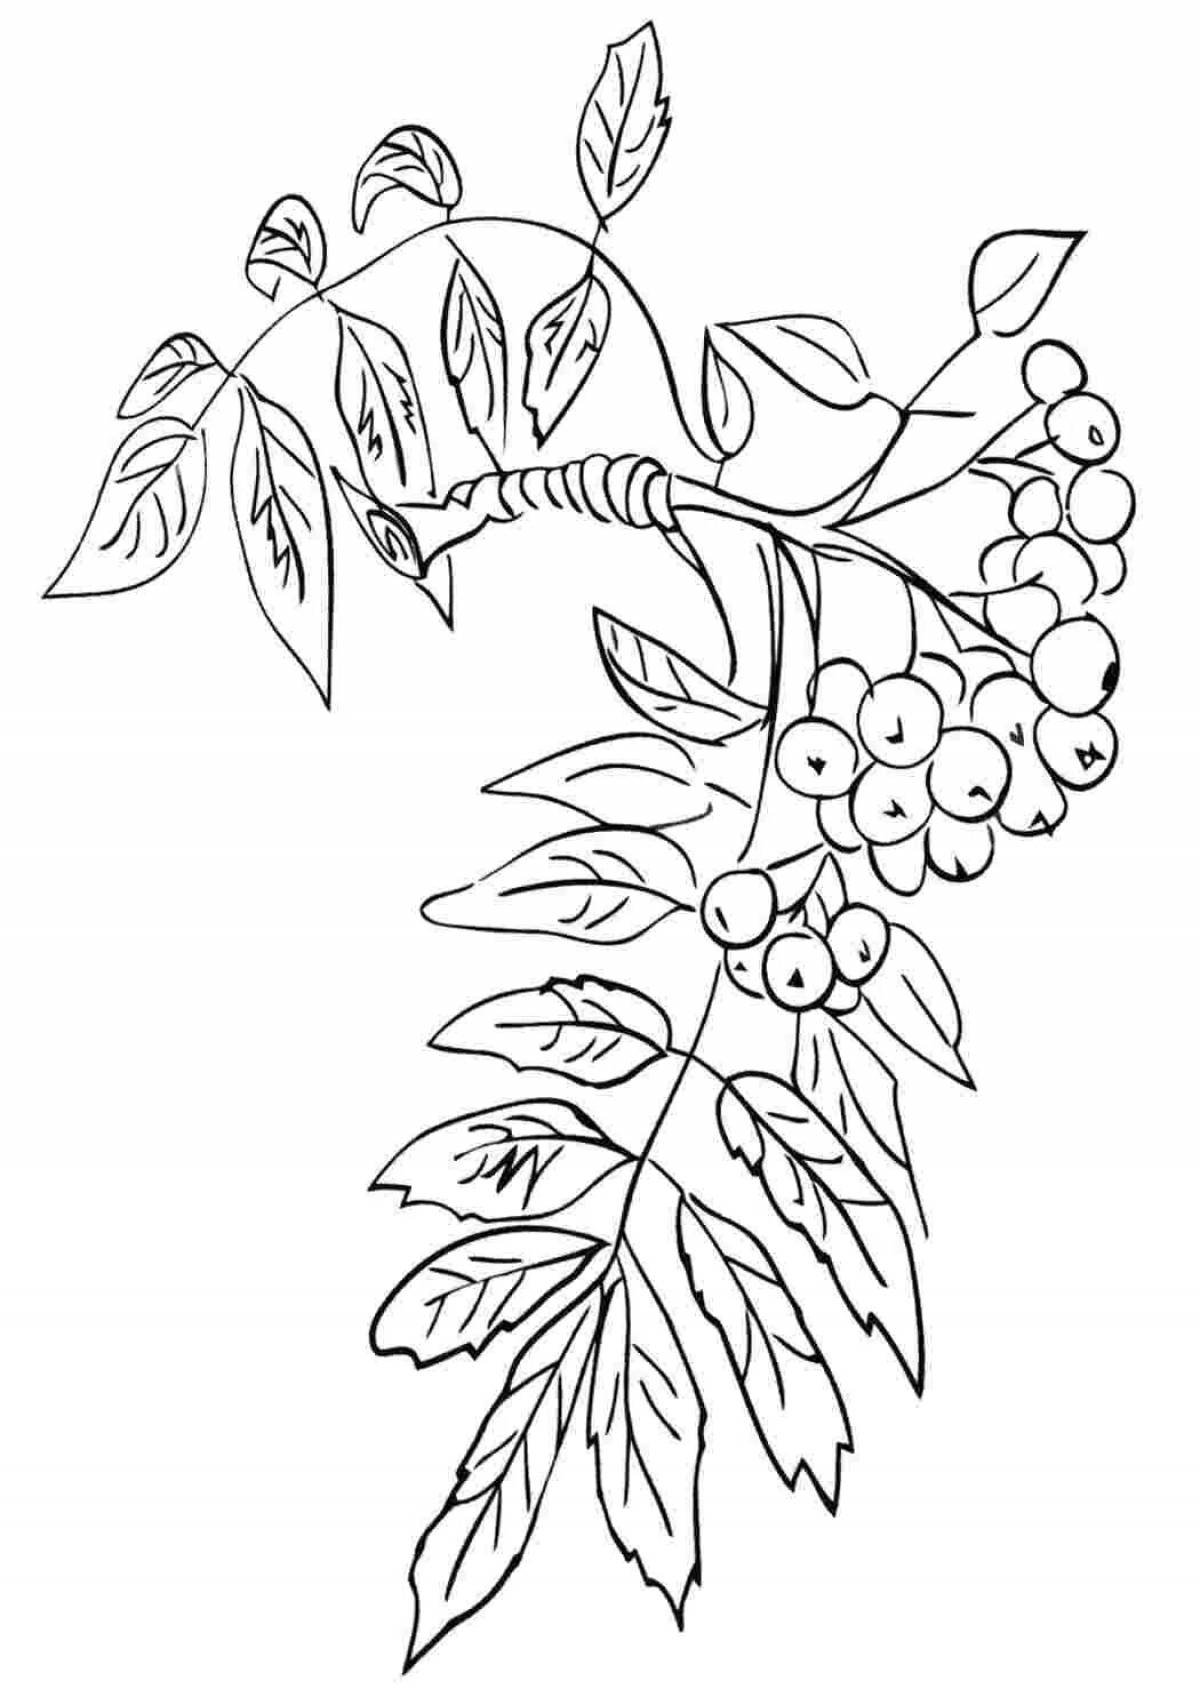 Glowing pok coloring page